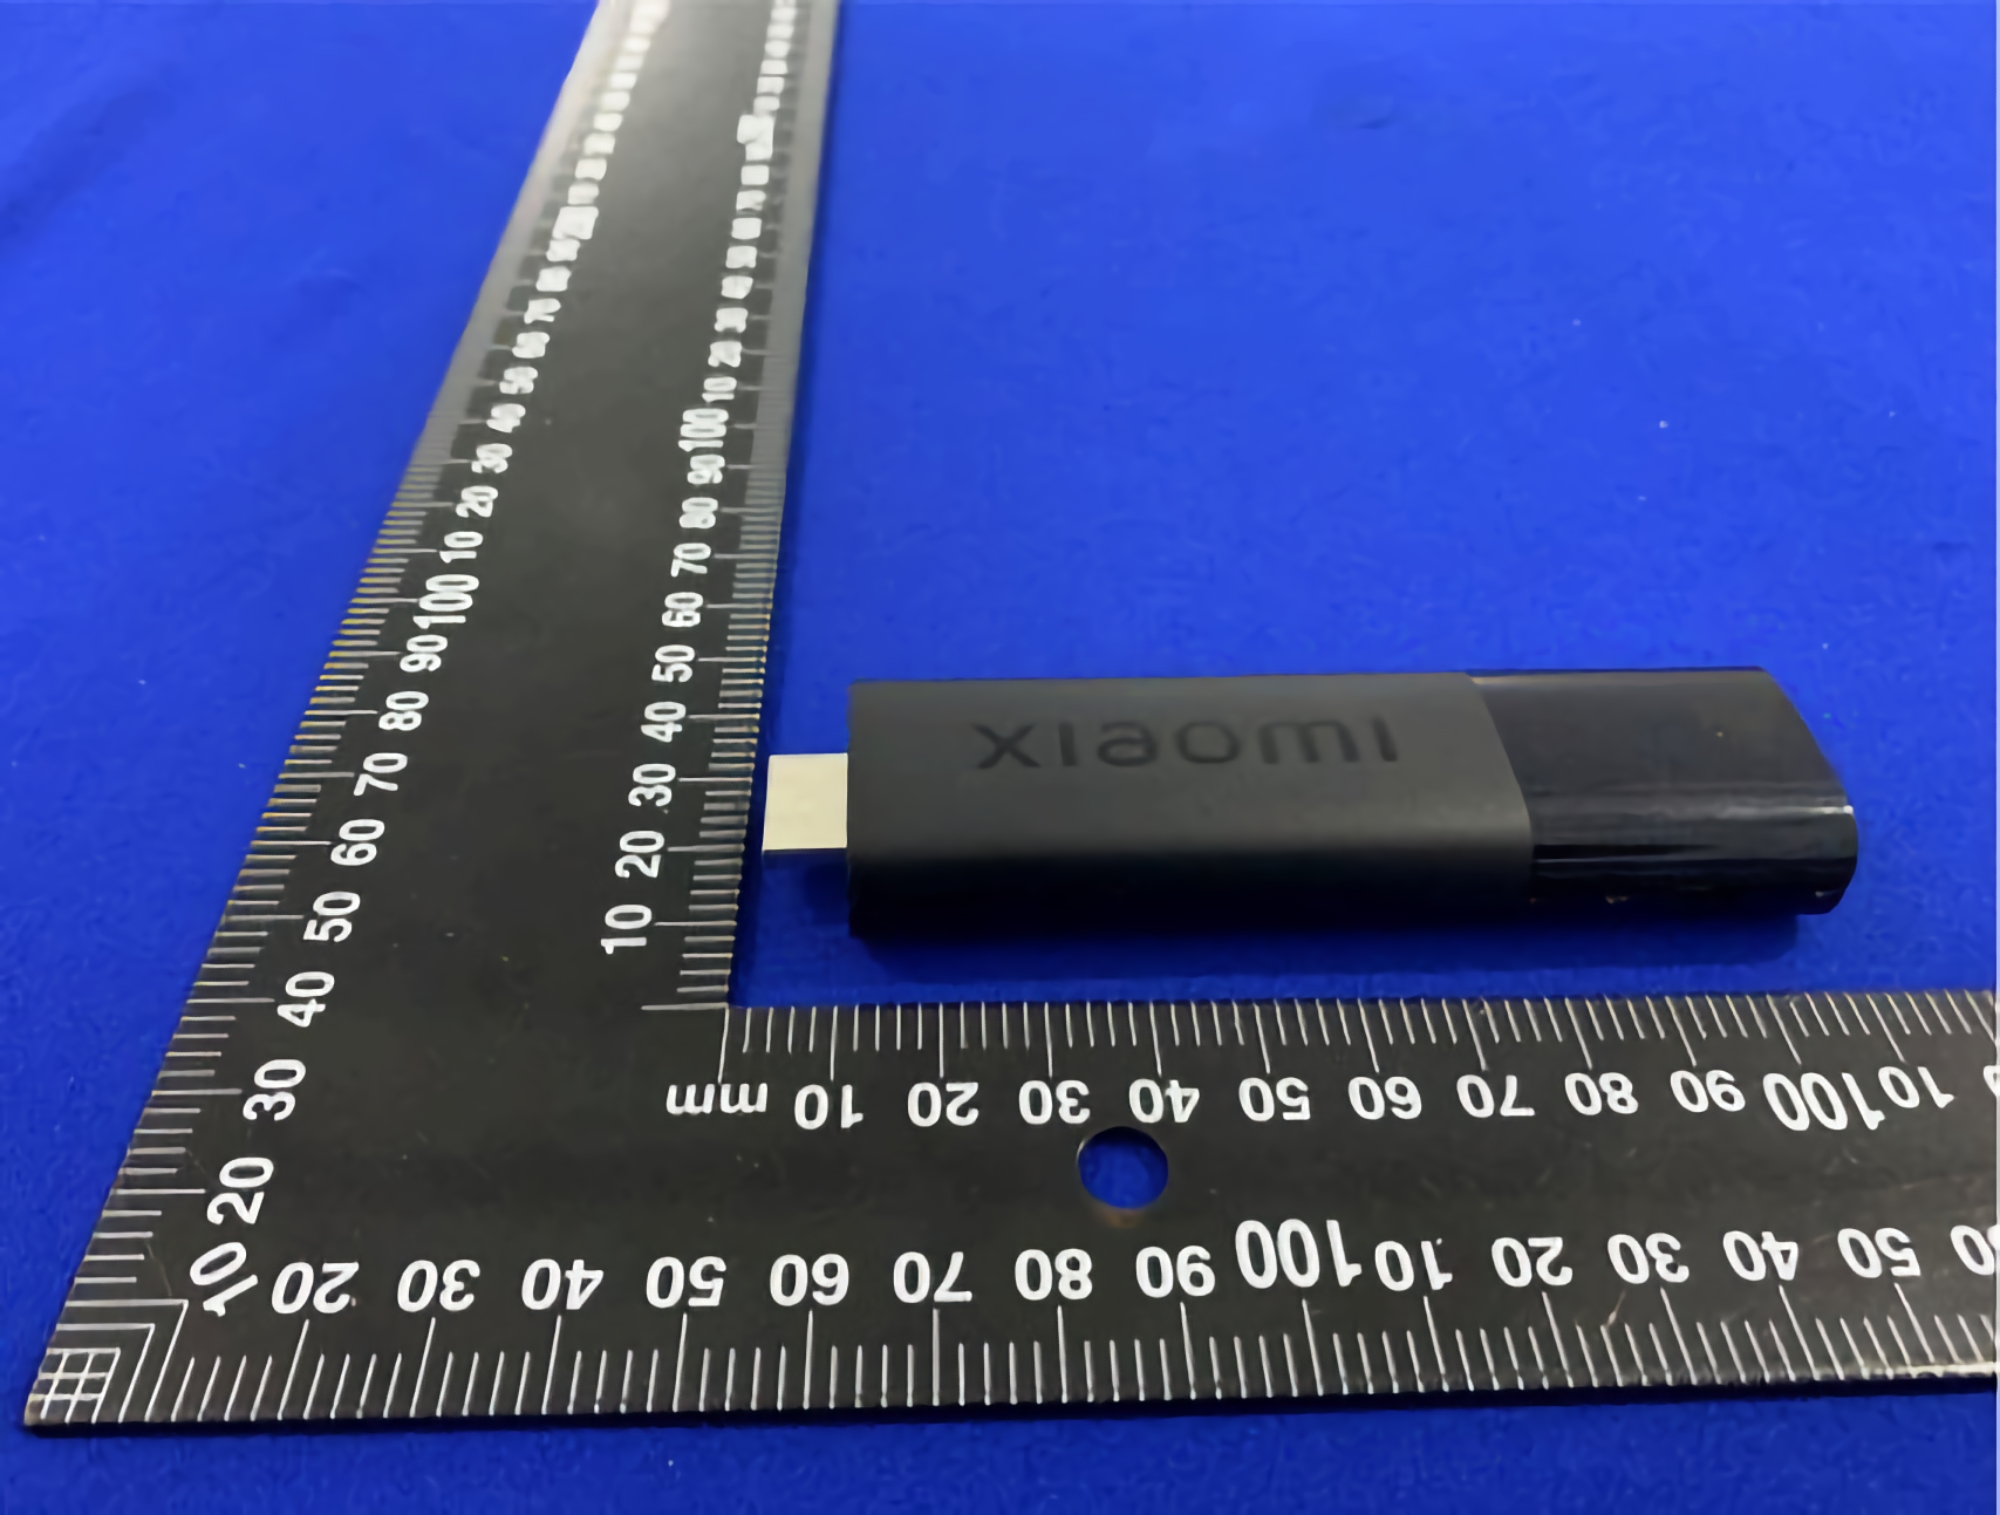 Xiaomi Mi TV Stick 2021 specs leaked online: new chip, improved Wi-Fi module and 4K support